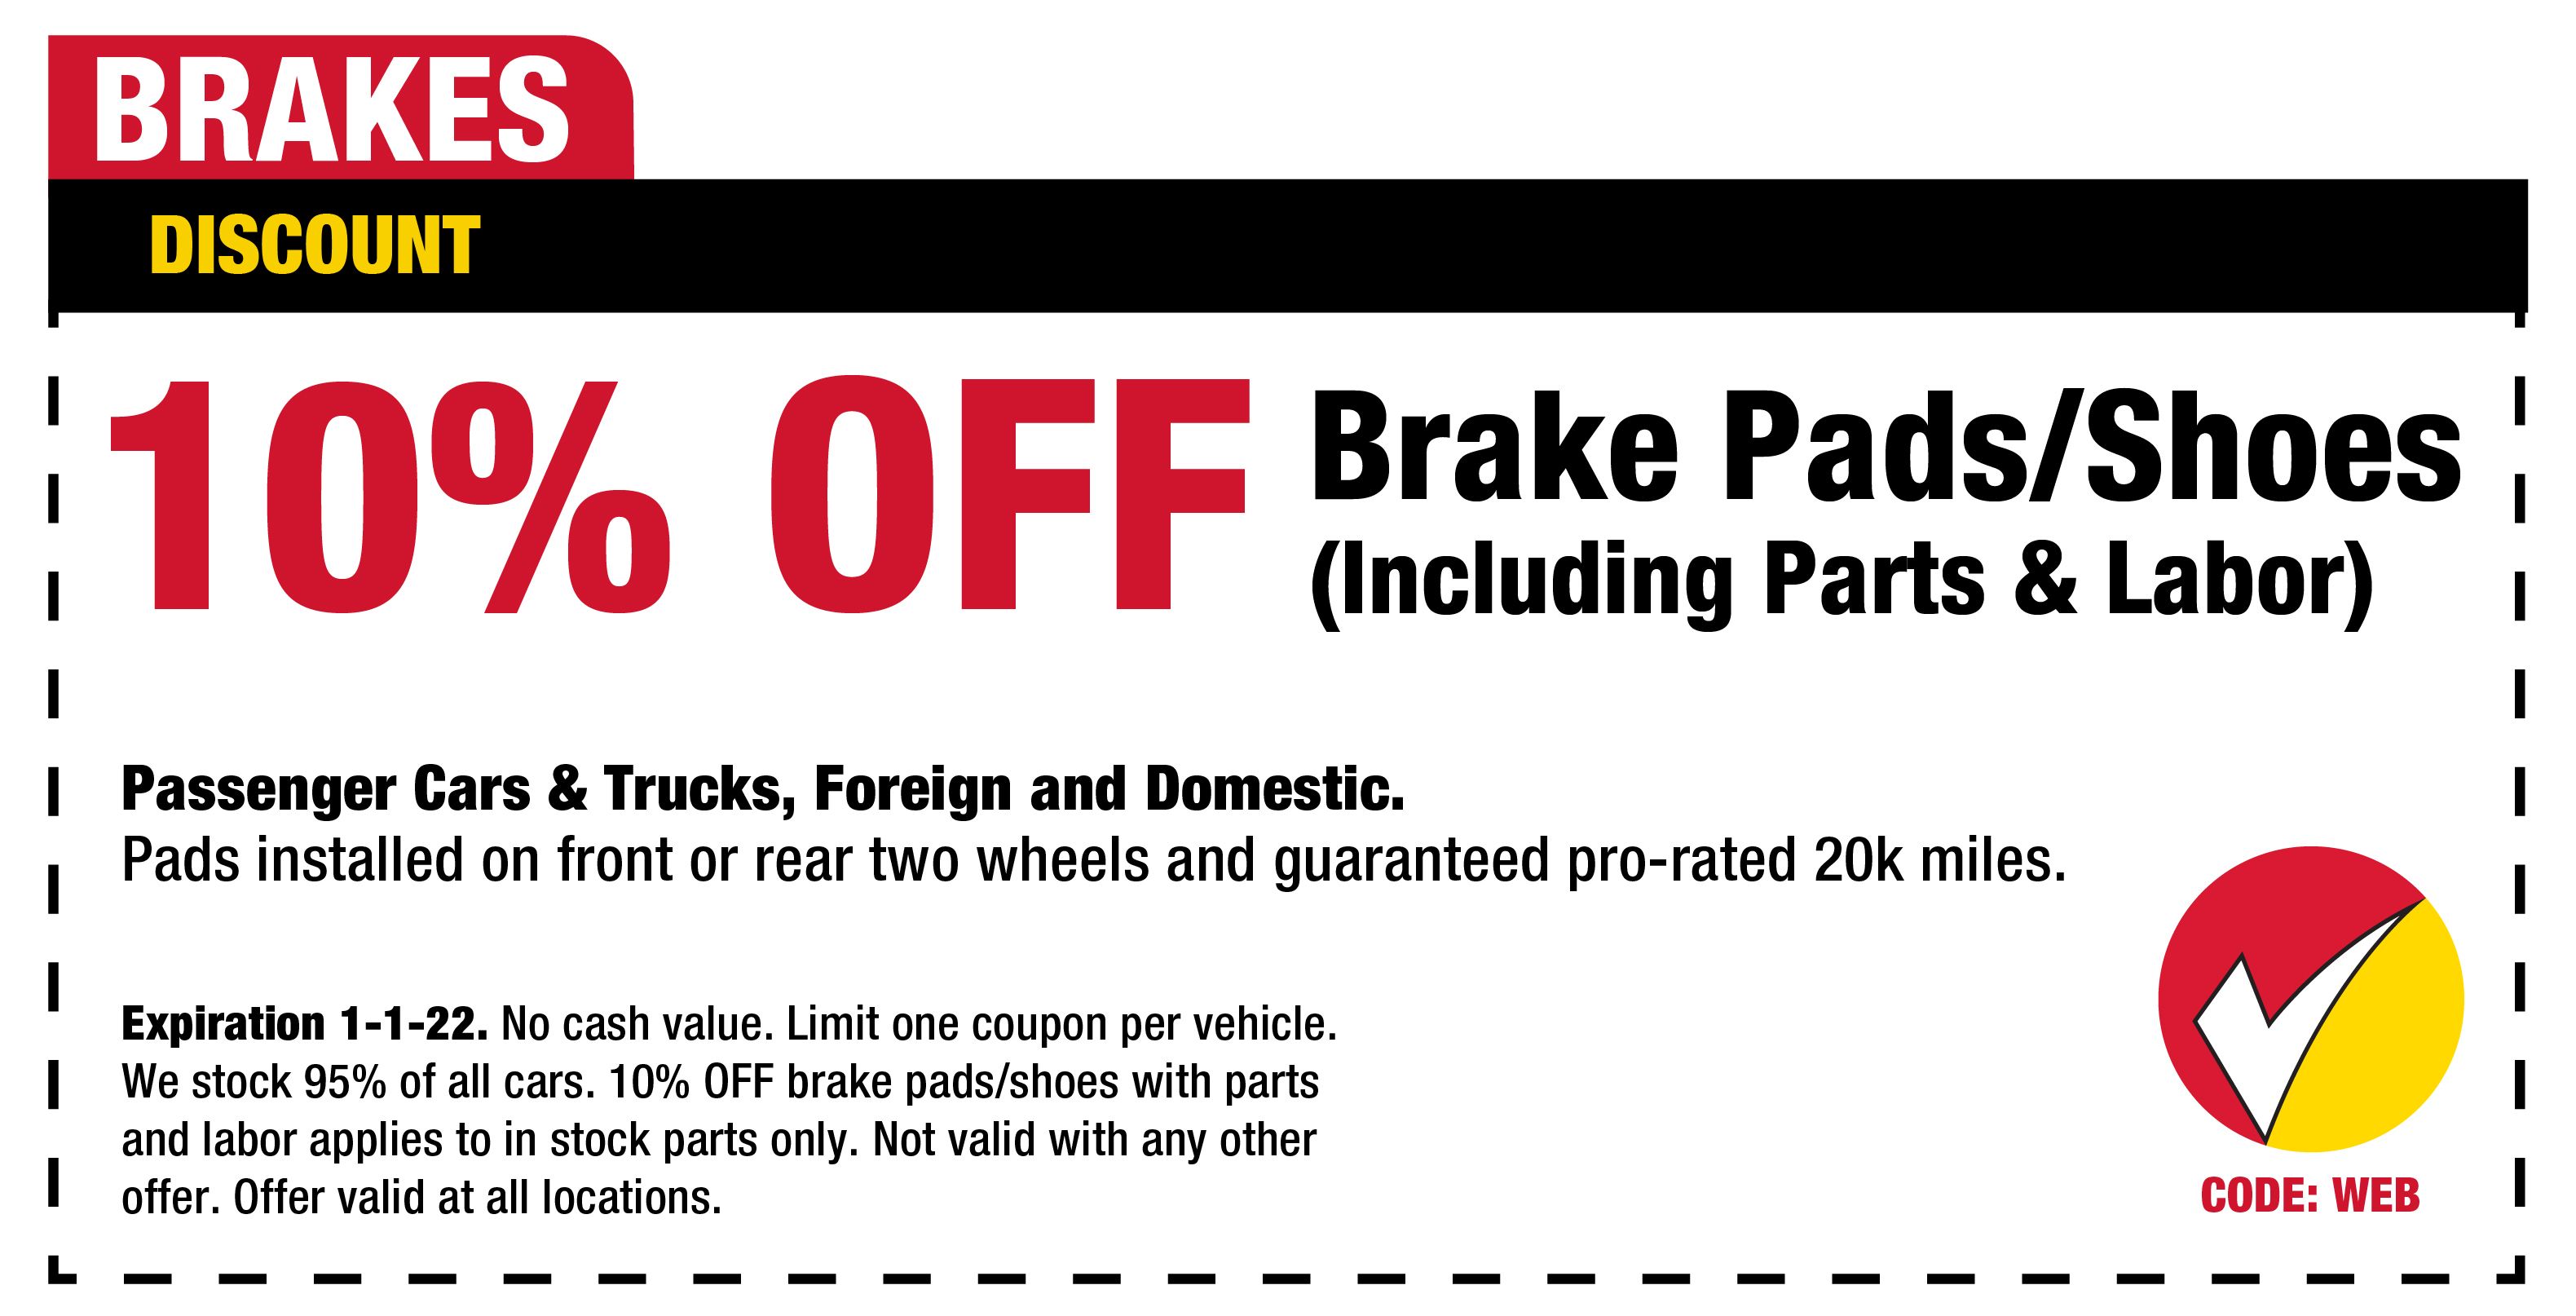 Brake Check, doing it right with price! FREE Inspections and fair